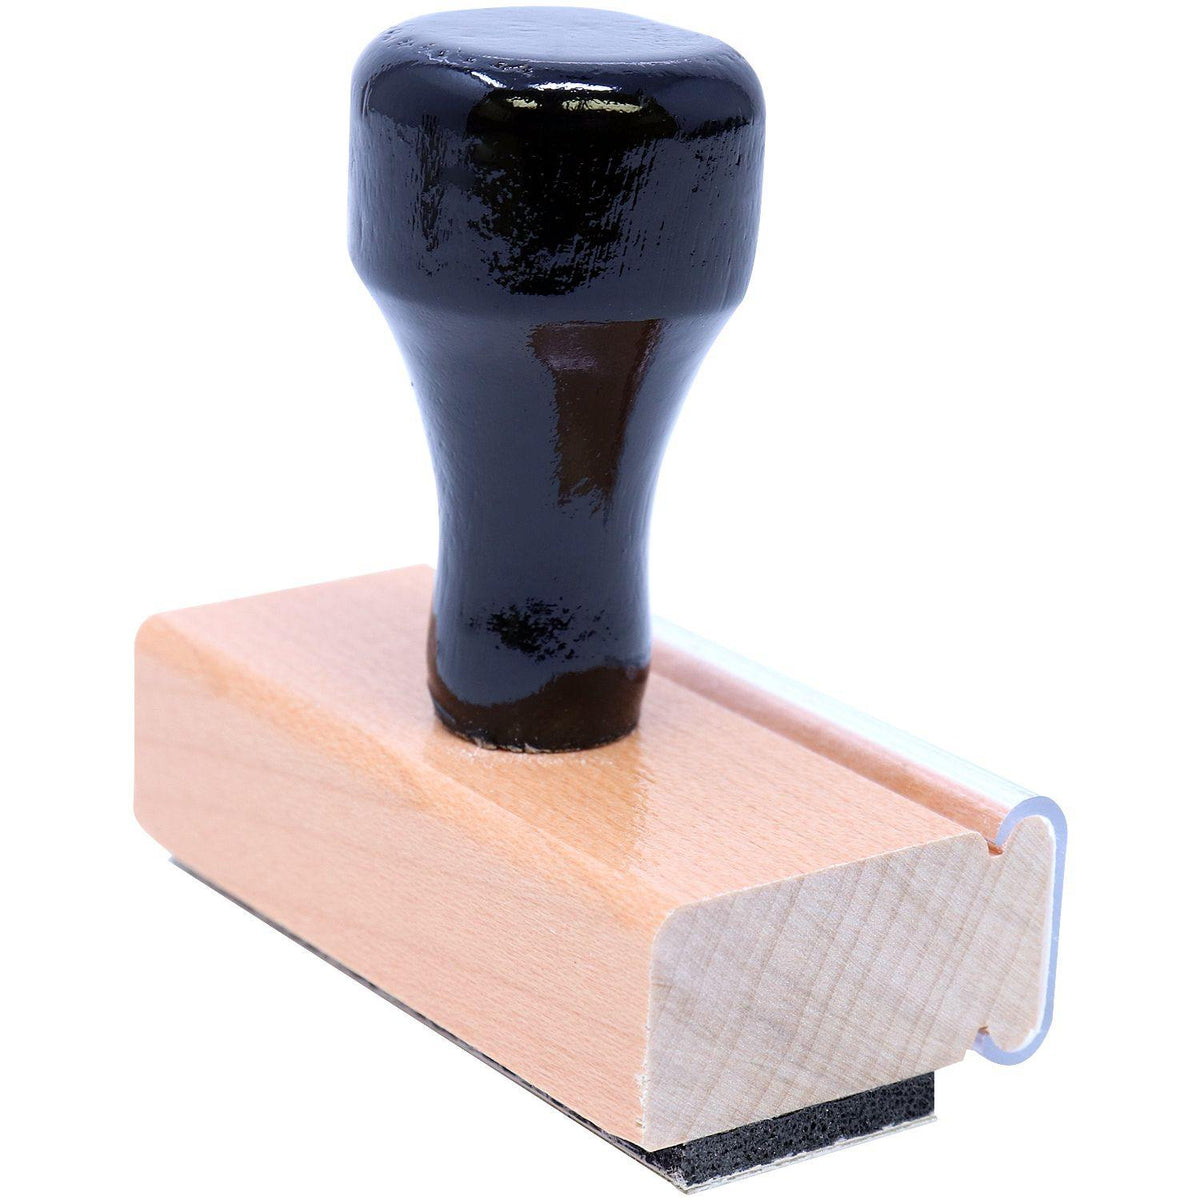 Lets review this with Lamp Rubber Stamp - Engineer Seal Stamps - Brand_Acorn, Impression Size_Small, Stamp Type_Regular Stamp, Type of Use_Teacher